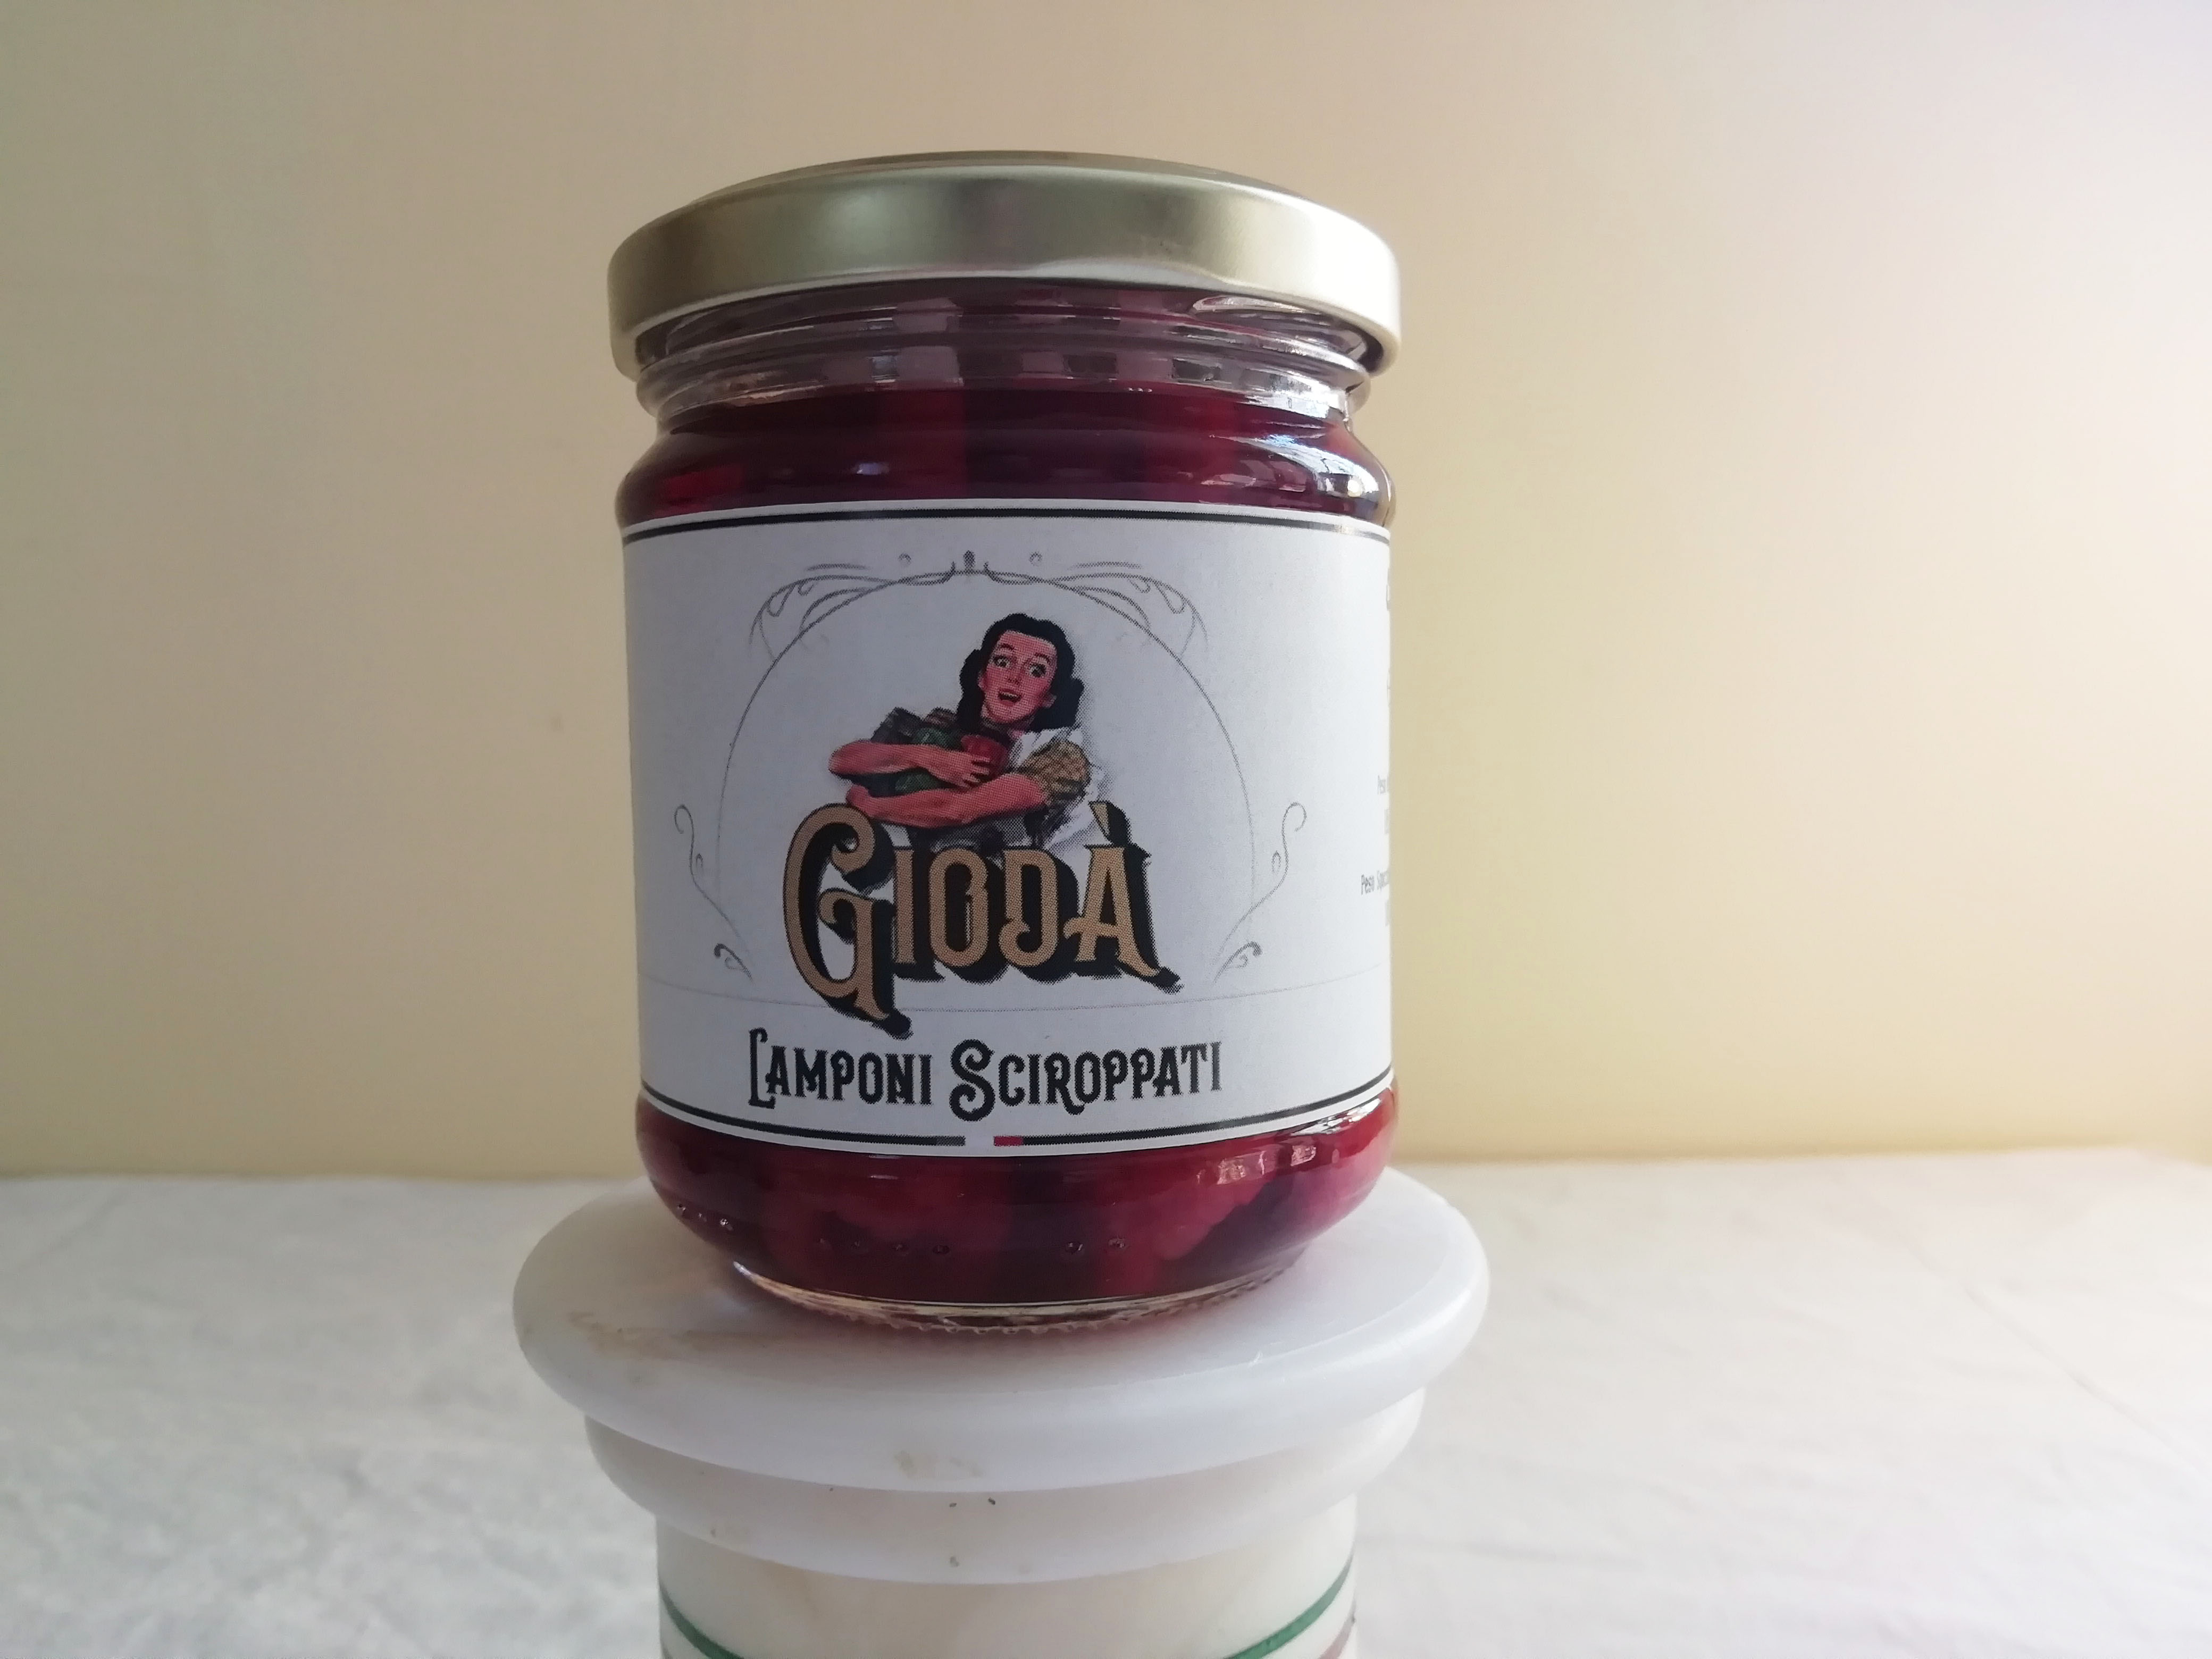 Lamponi sciroppati - Raspberries in syrup